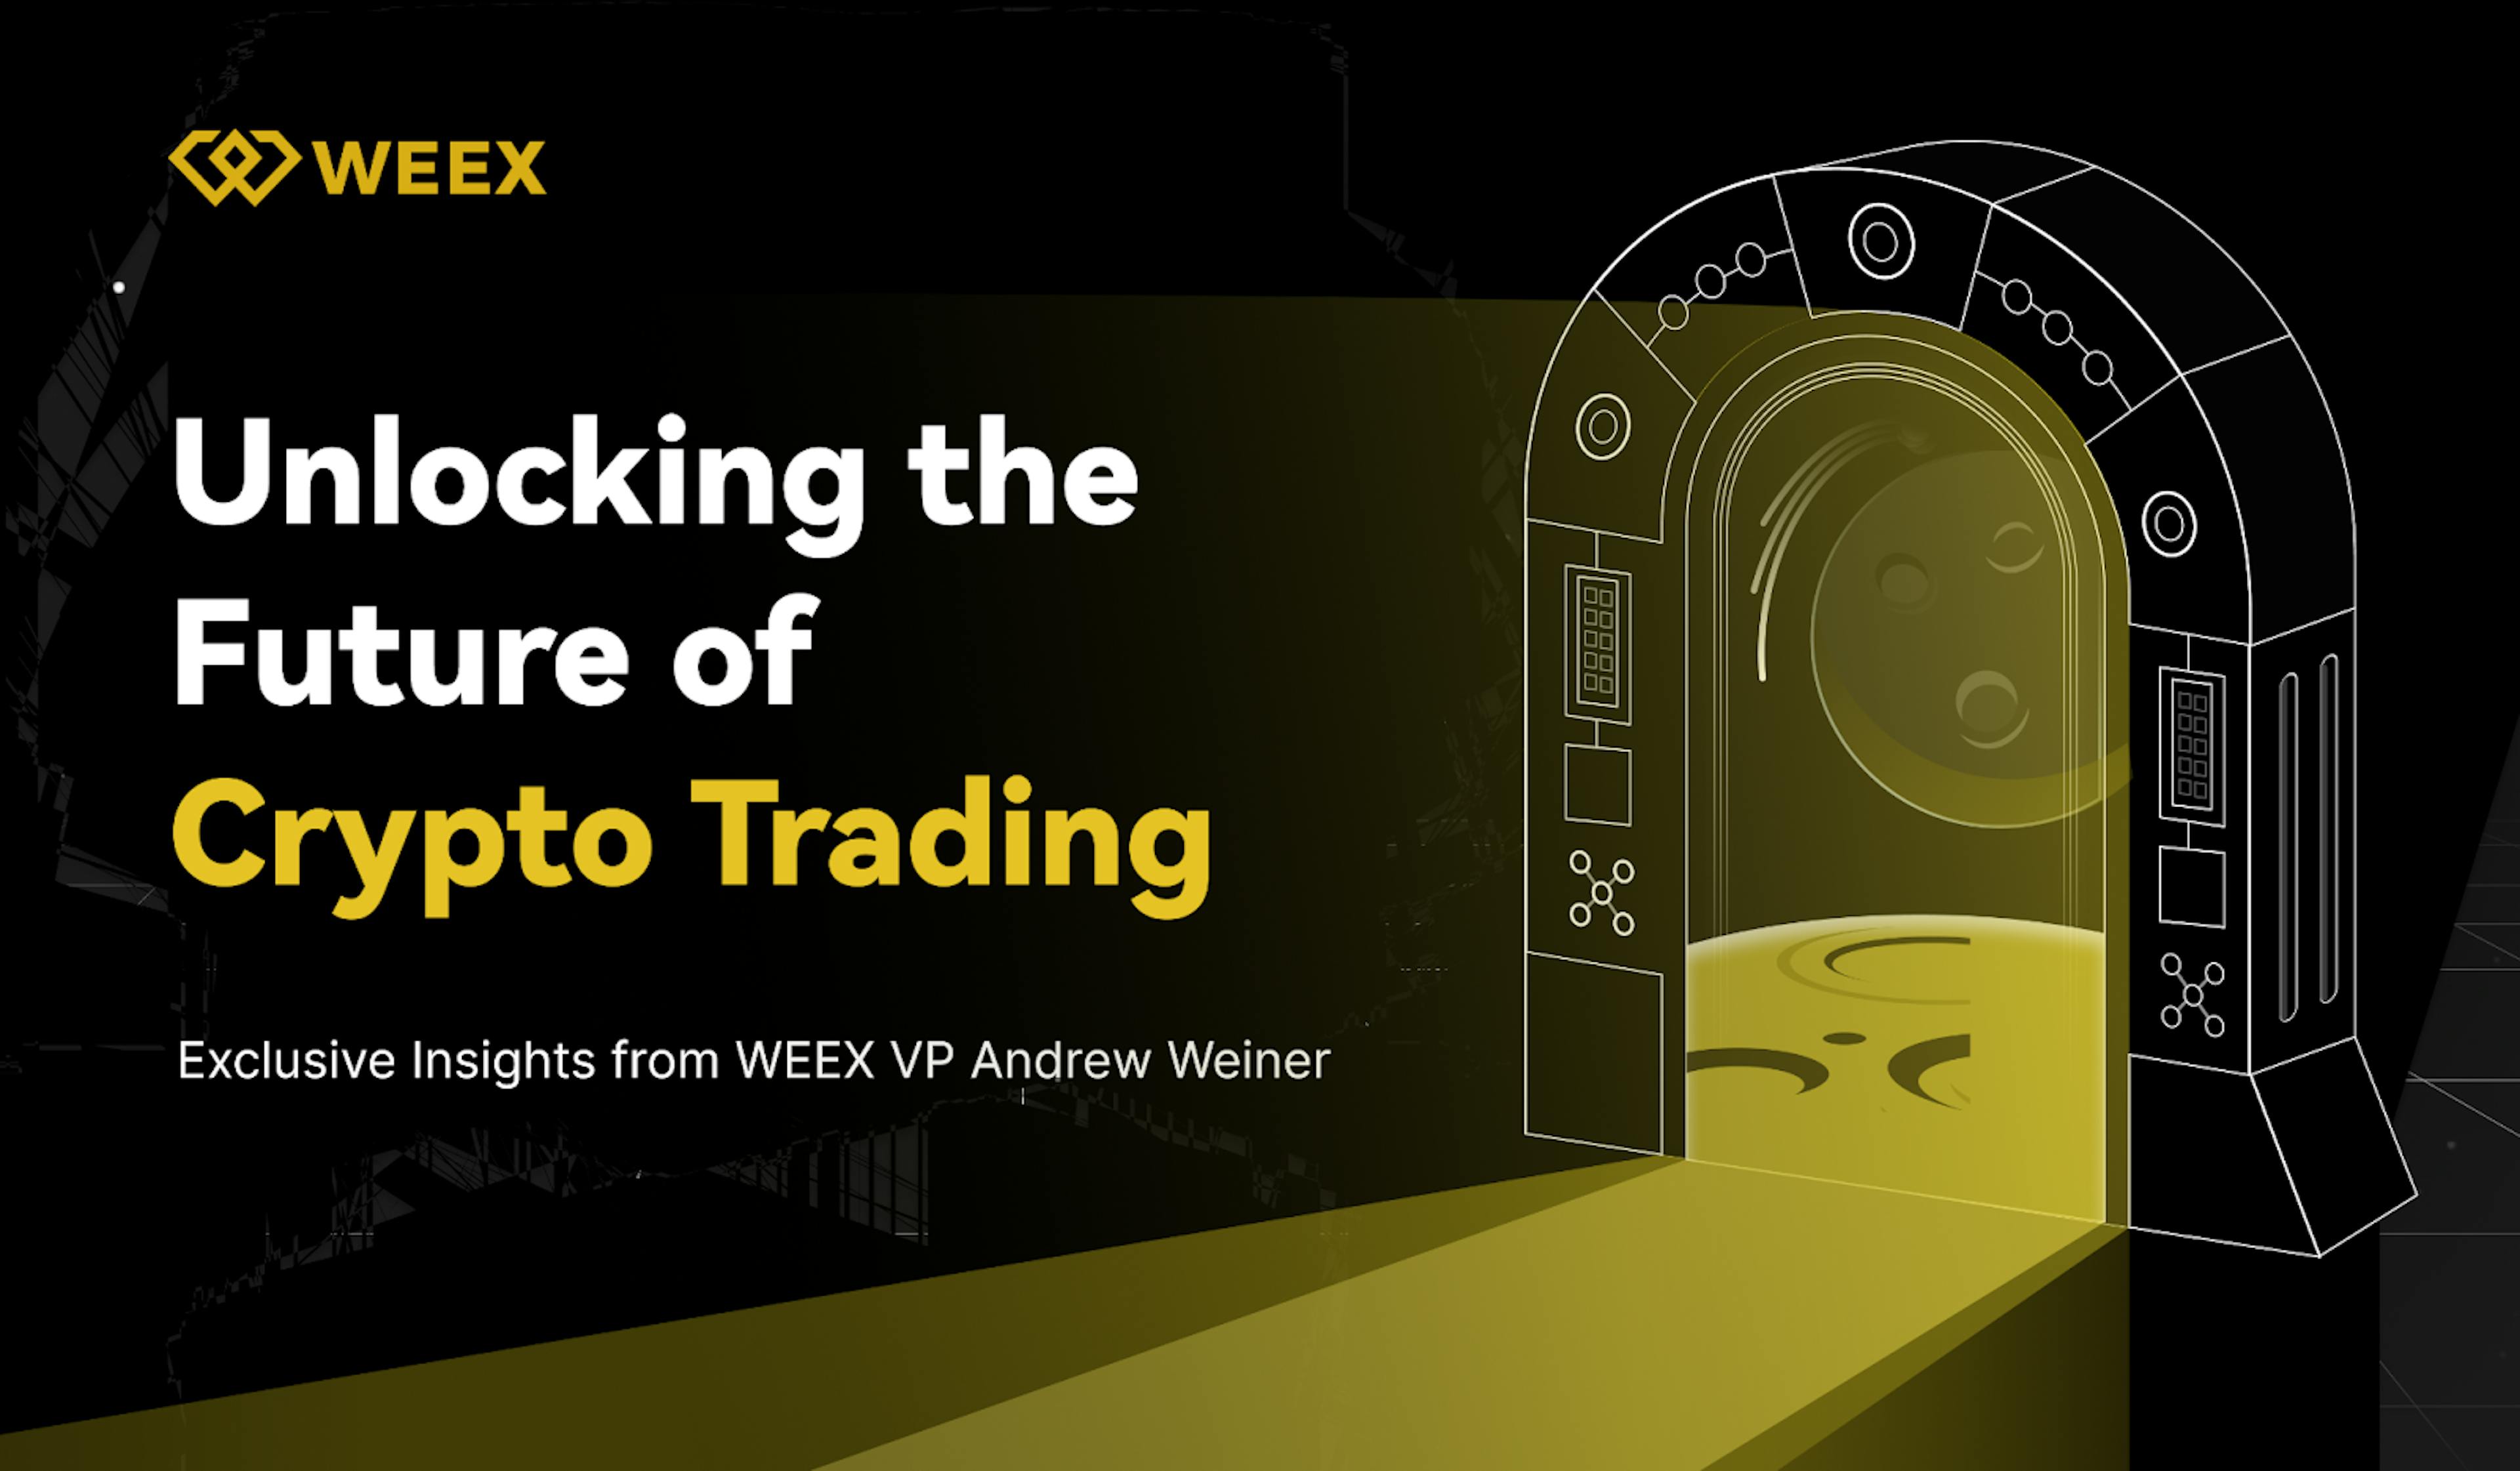 /interview-with-andrew-weiner-vp-weex-unlocking-the-future-of-crypto-trading feature image